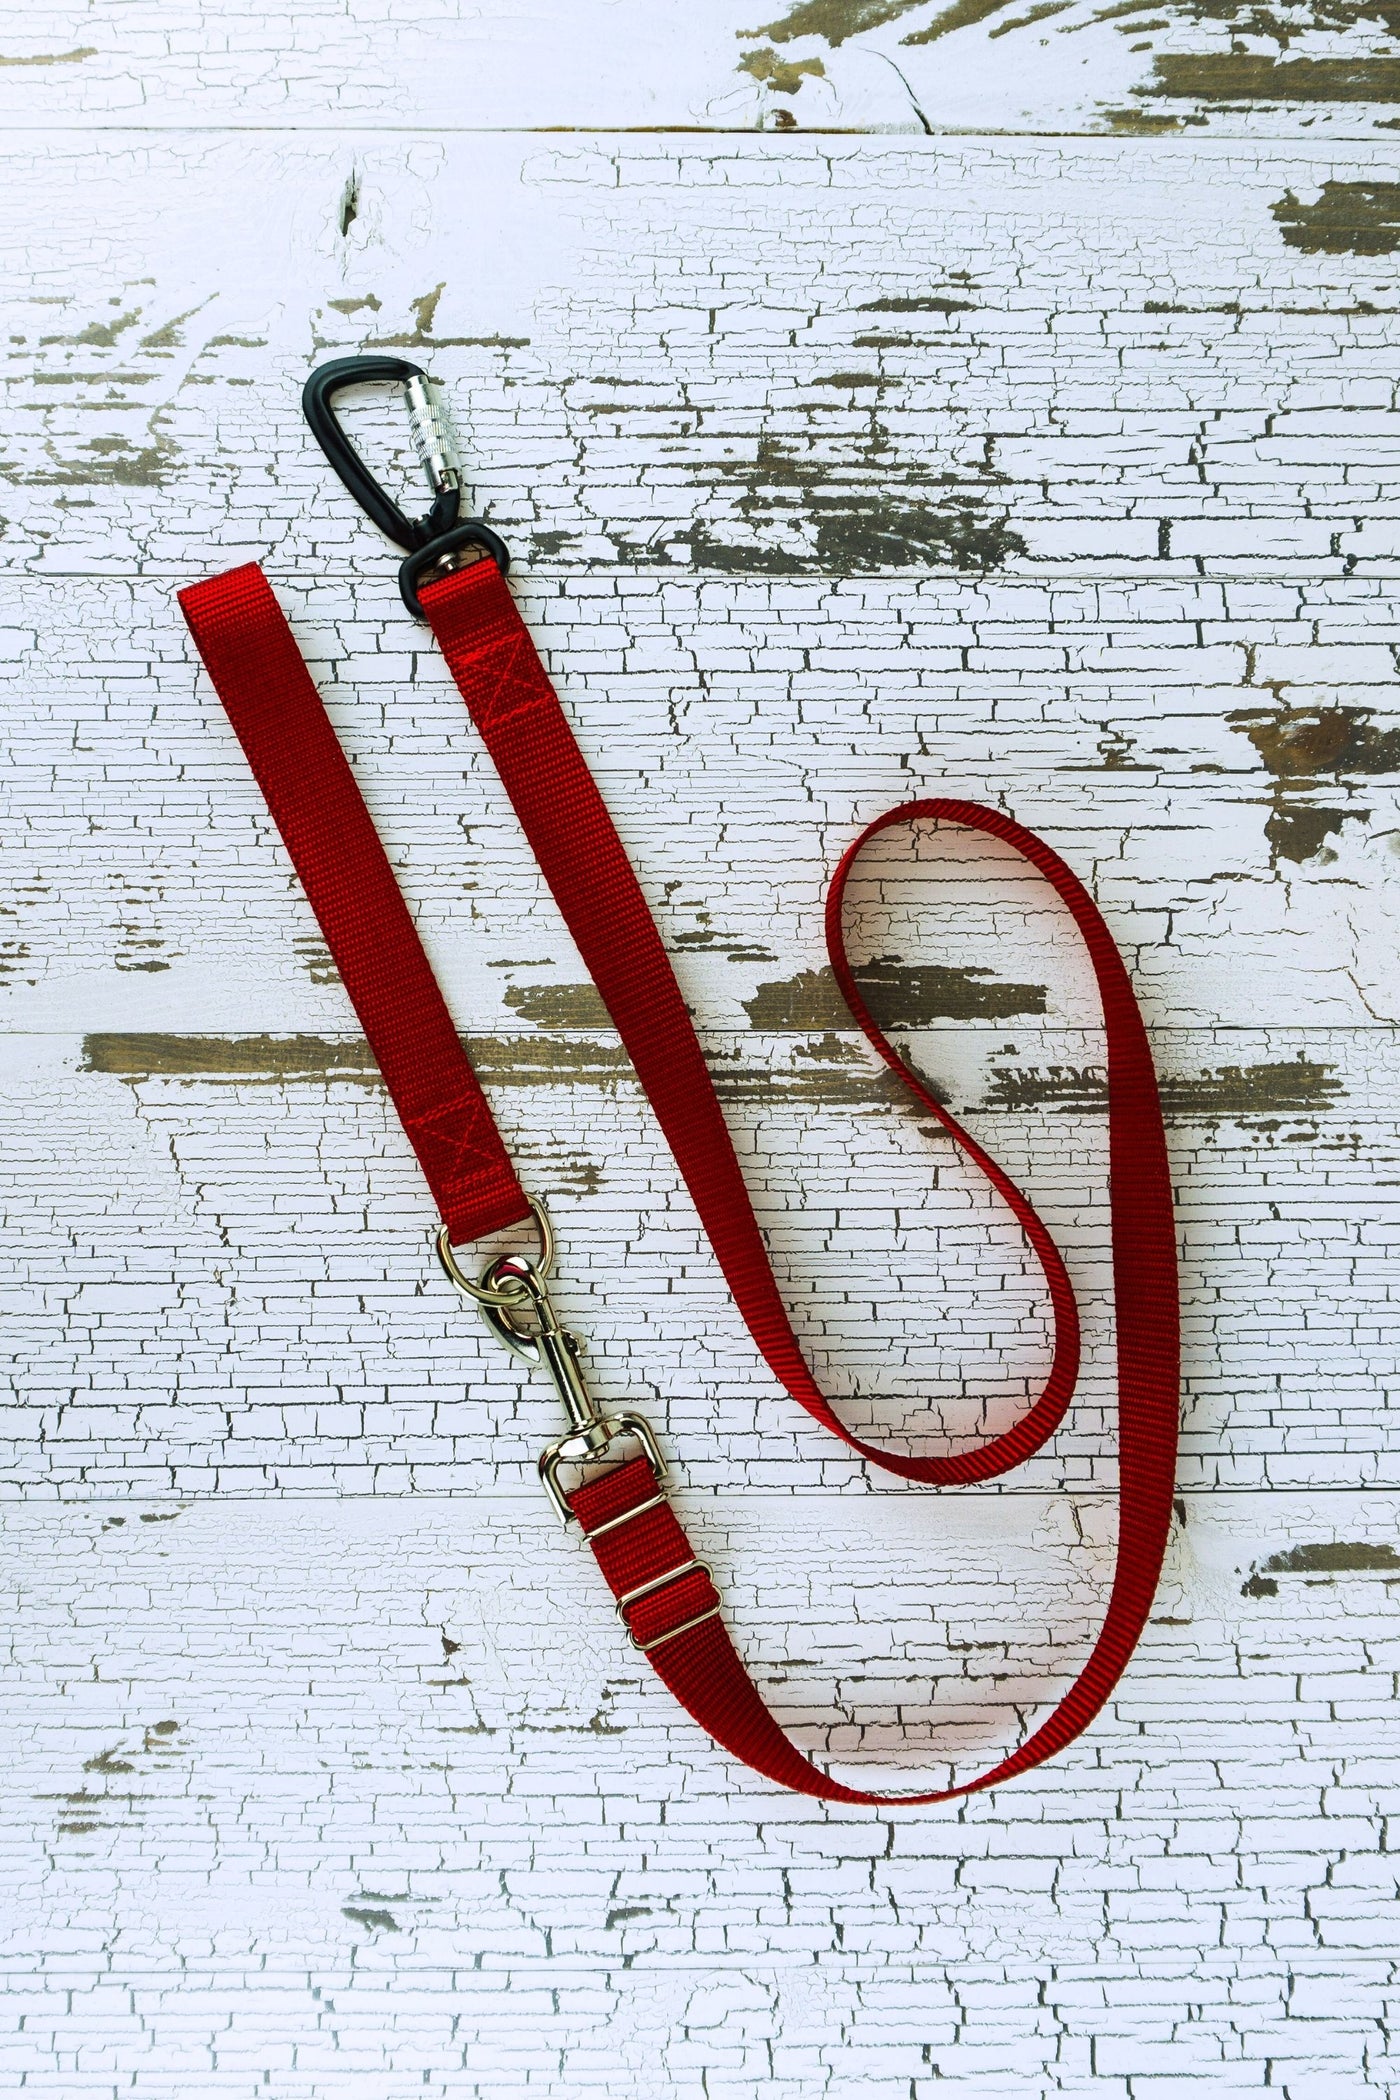 Adjustable length hands free leash shown here in red, converted to a handheld leash by the addition of a leash handle with a d ring.